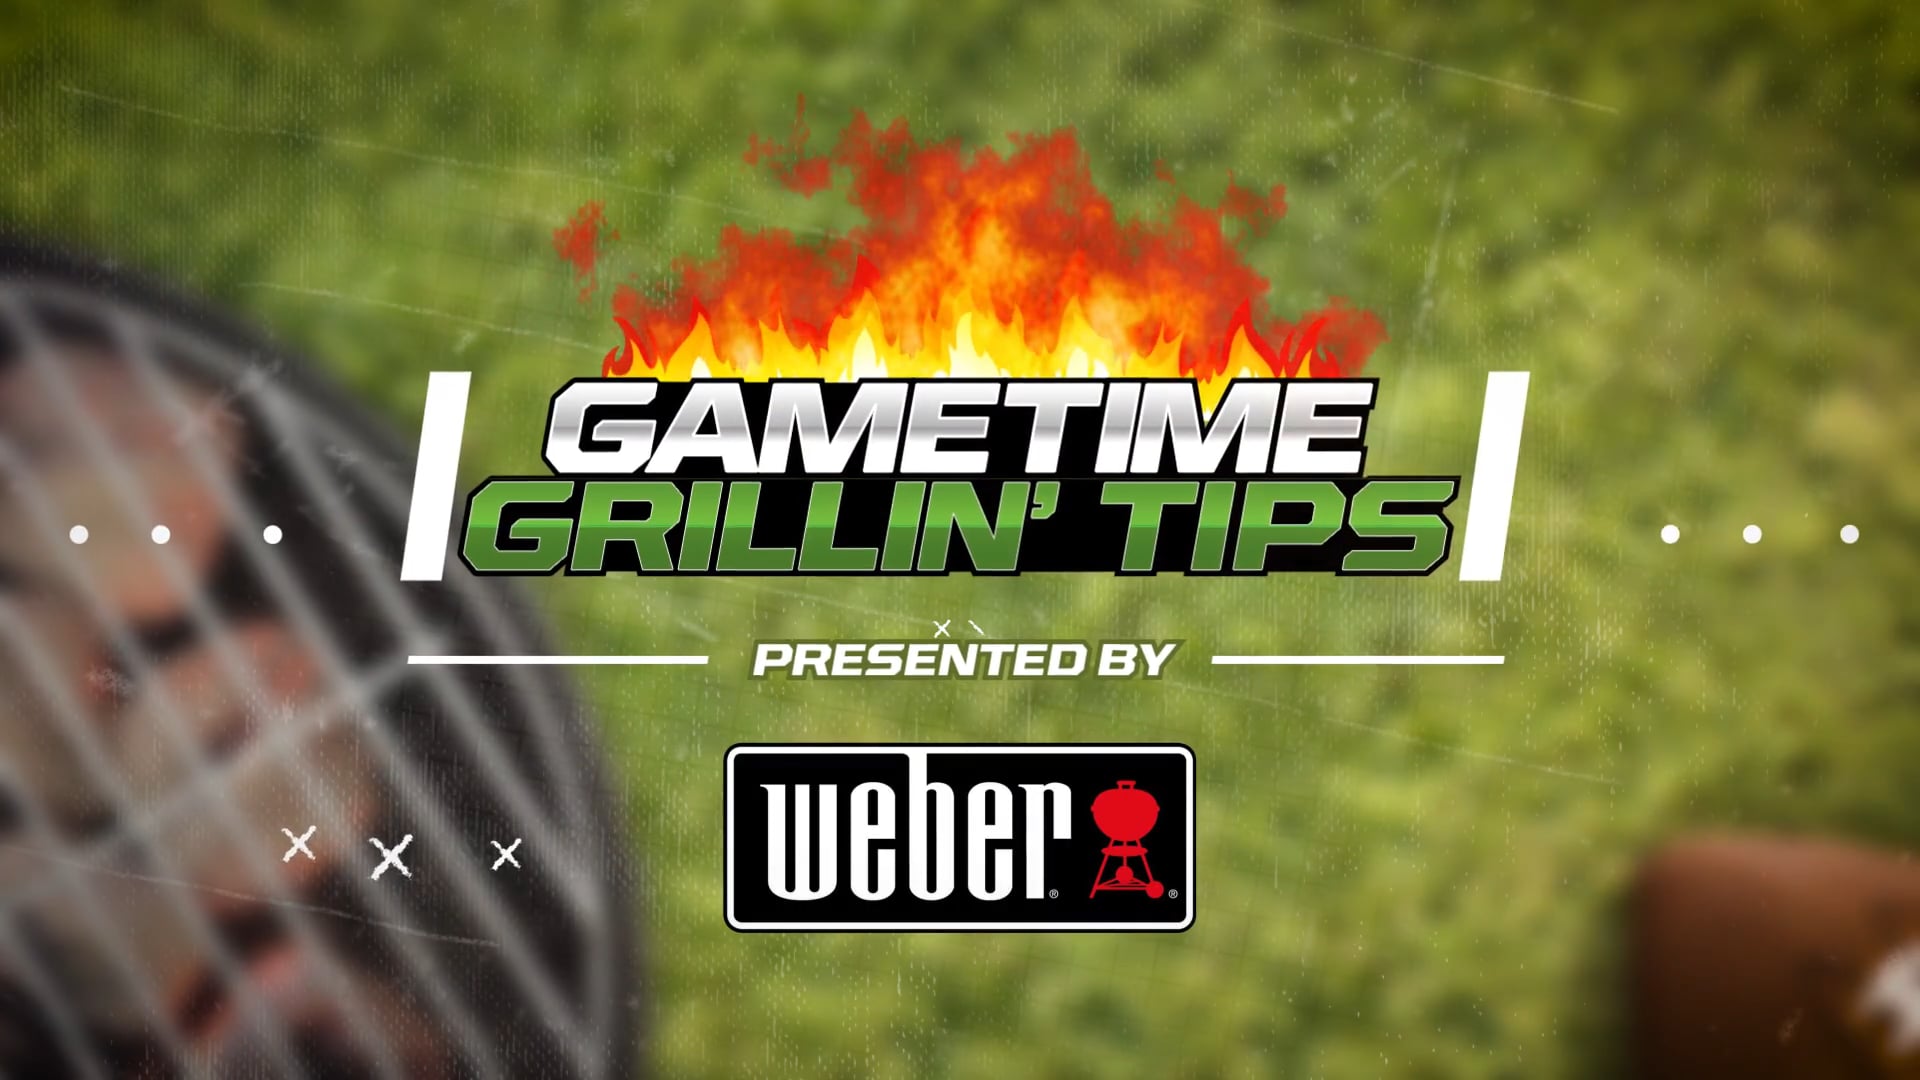 Game Time Grillin - Spiral Cut Dogs